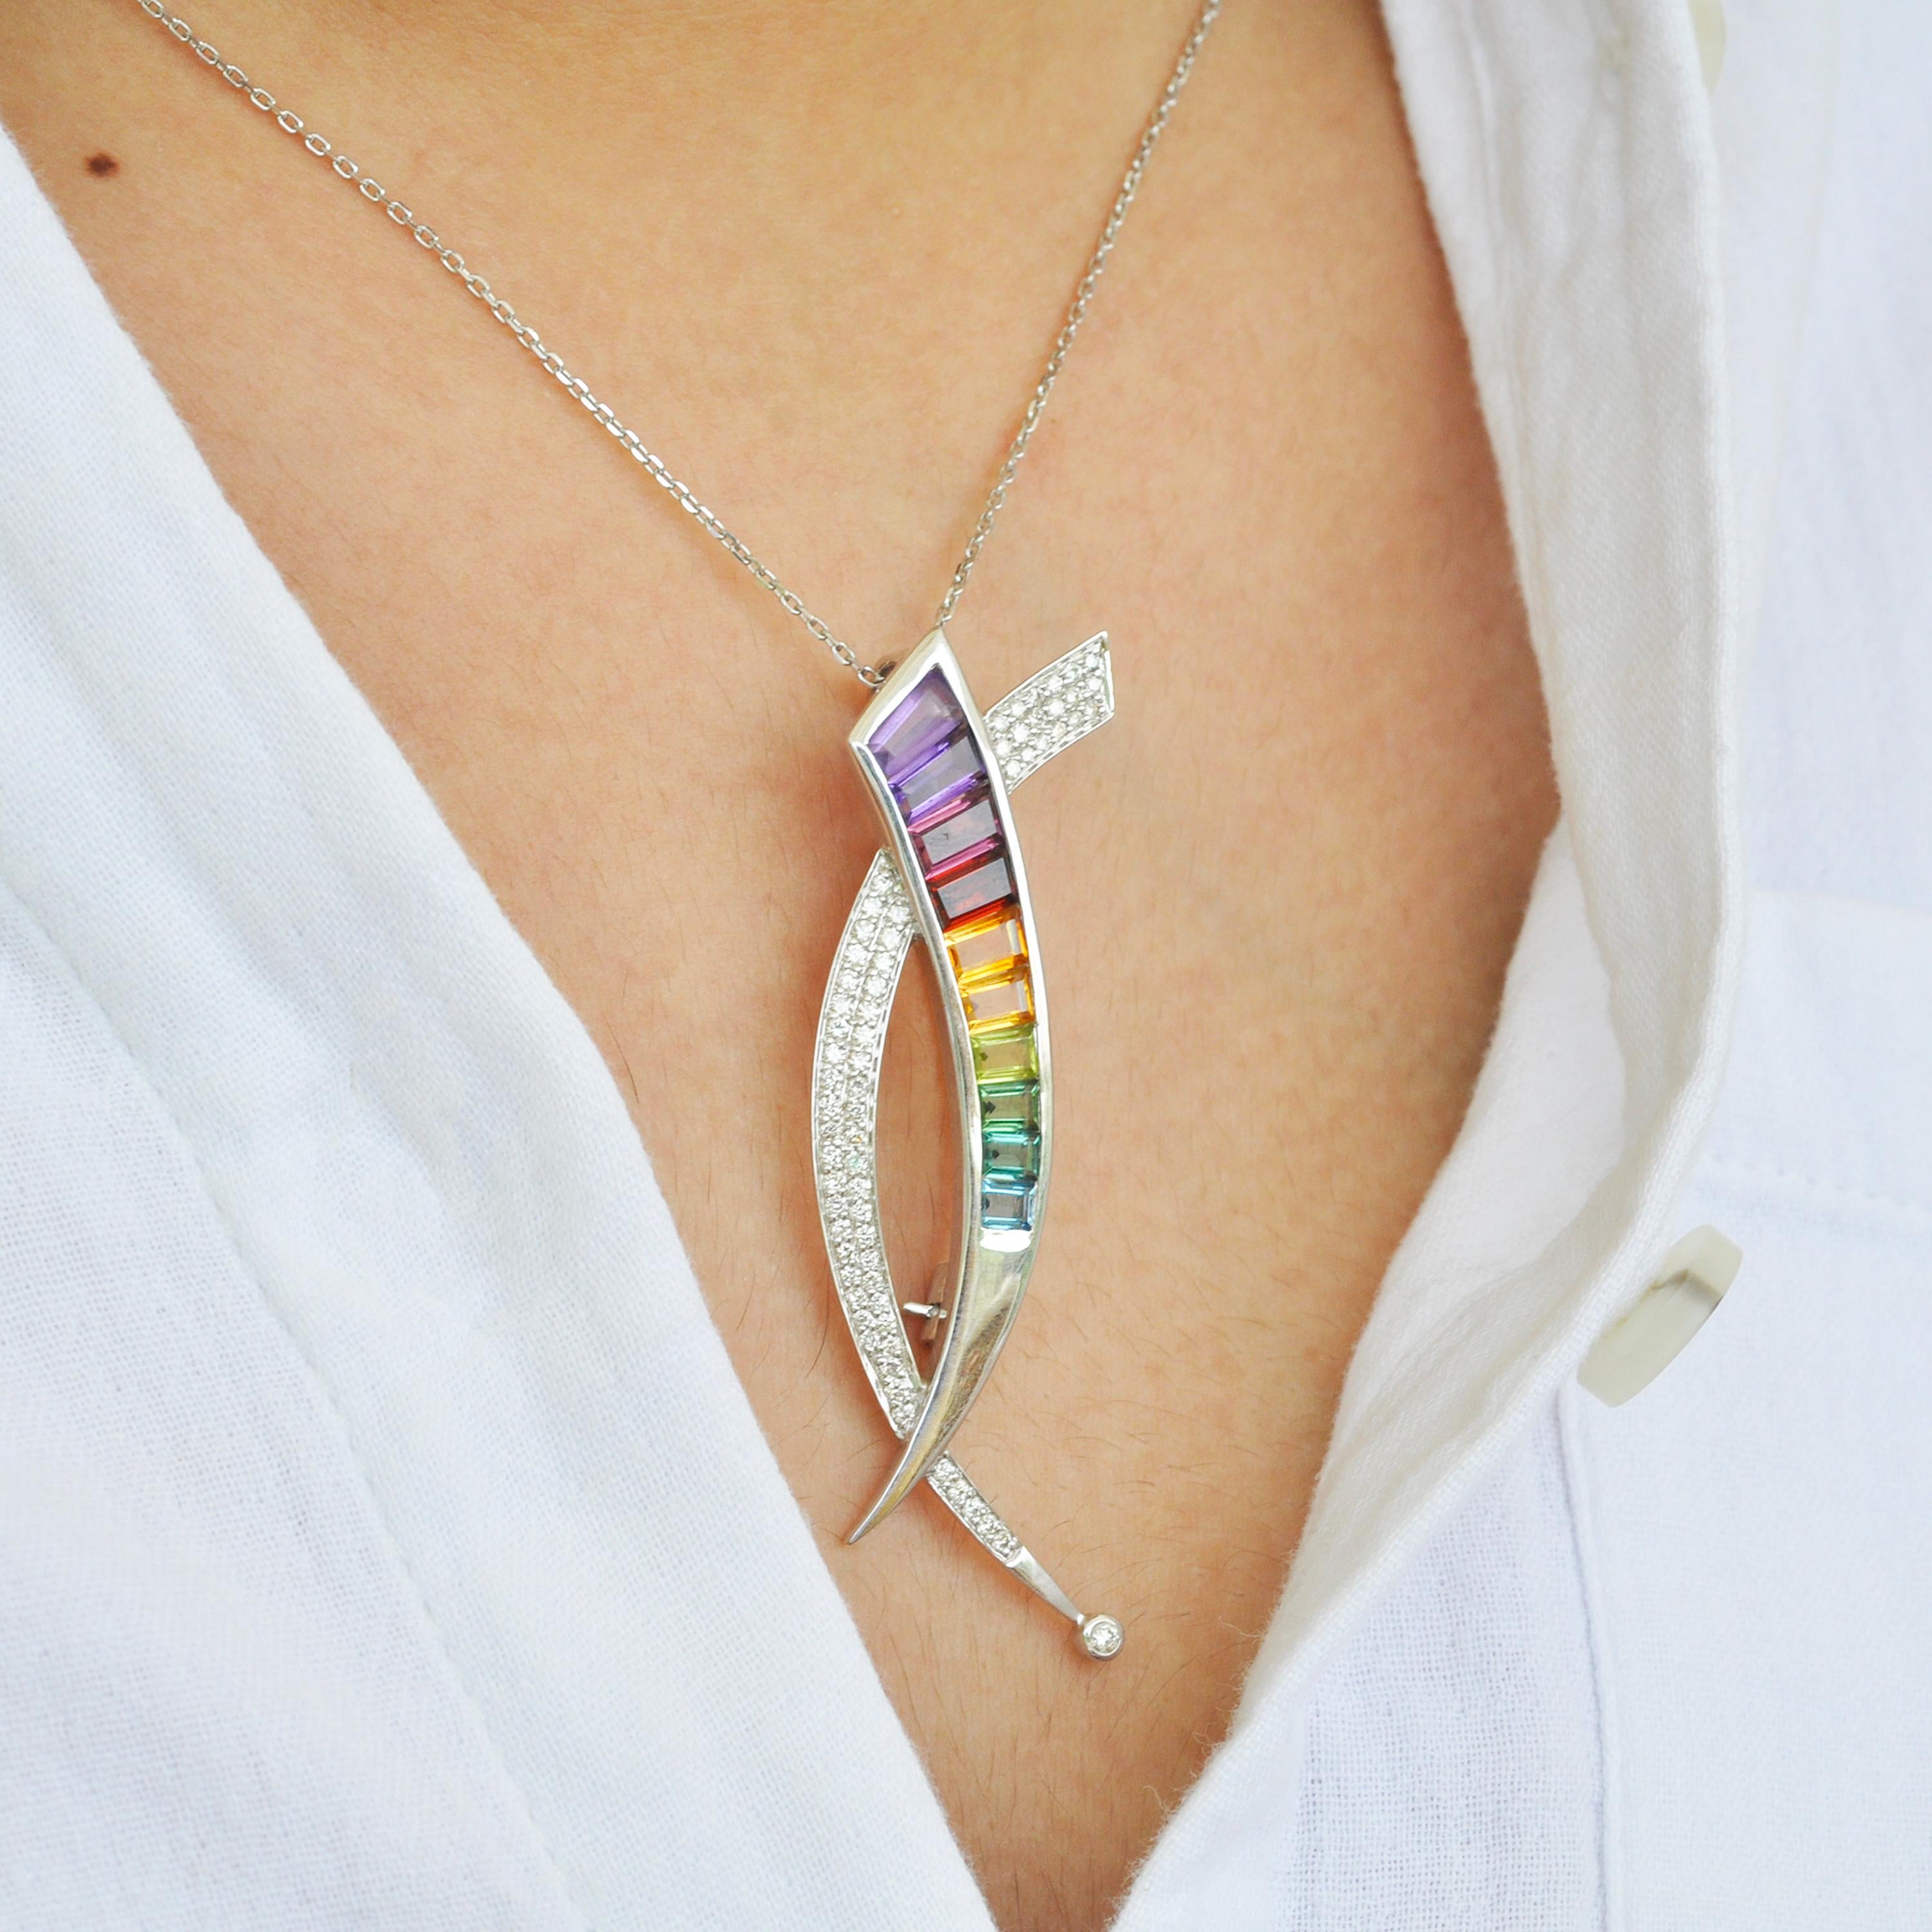 A sword shaped brooch is set in 18K Gold, which can also be worn as a pendant. The pendant brooch features exotic natural gemstones like Amethysts, Garnet, Rhodolite, Tourmaline, Citrine, Peridot and Topaz, perfectly taper cut and channel set,